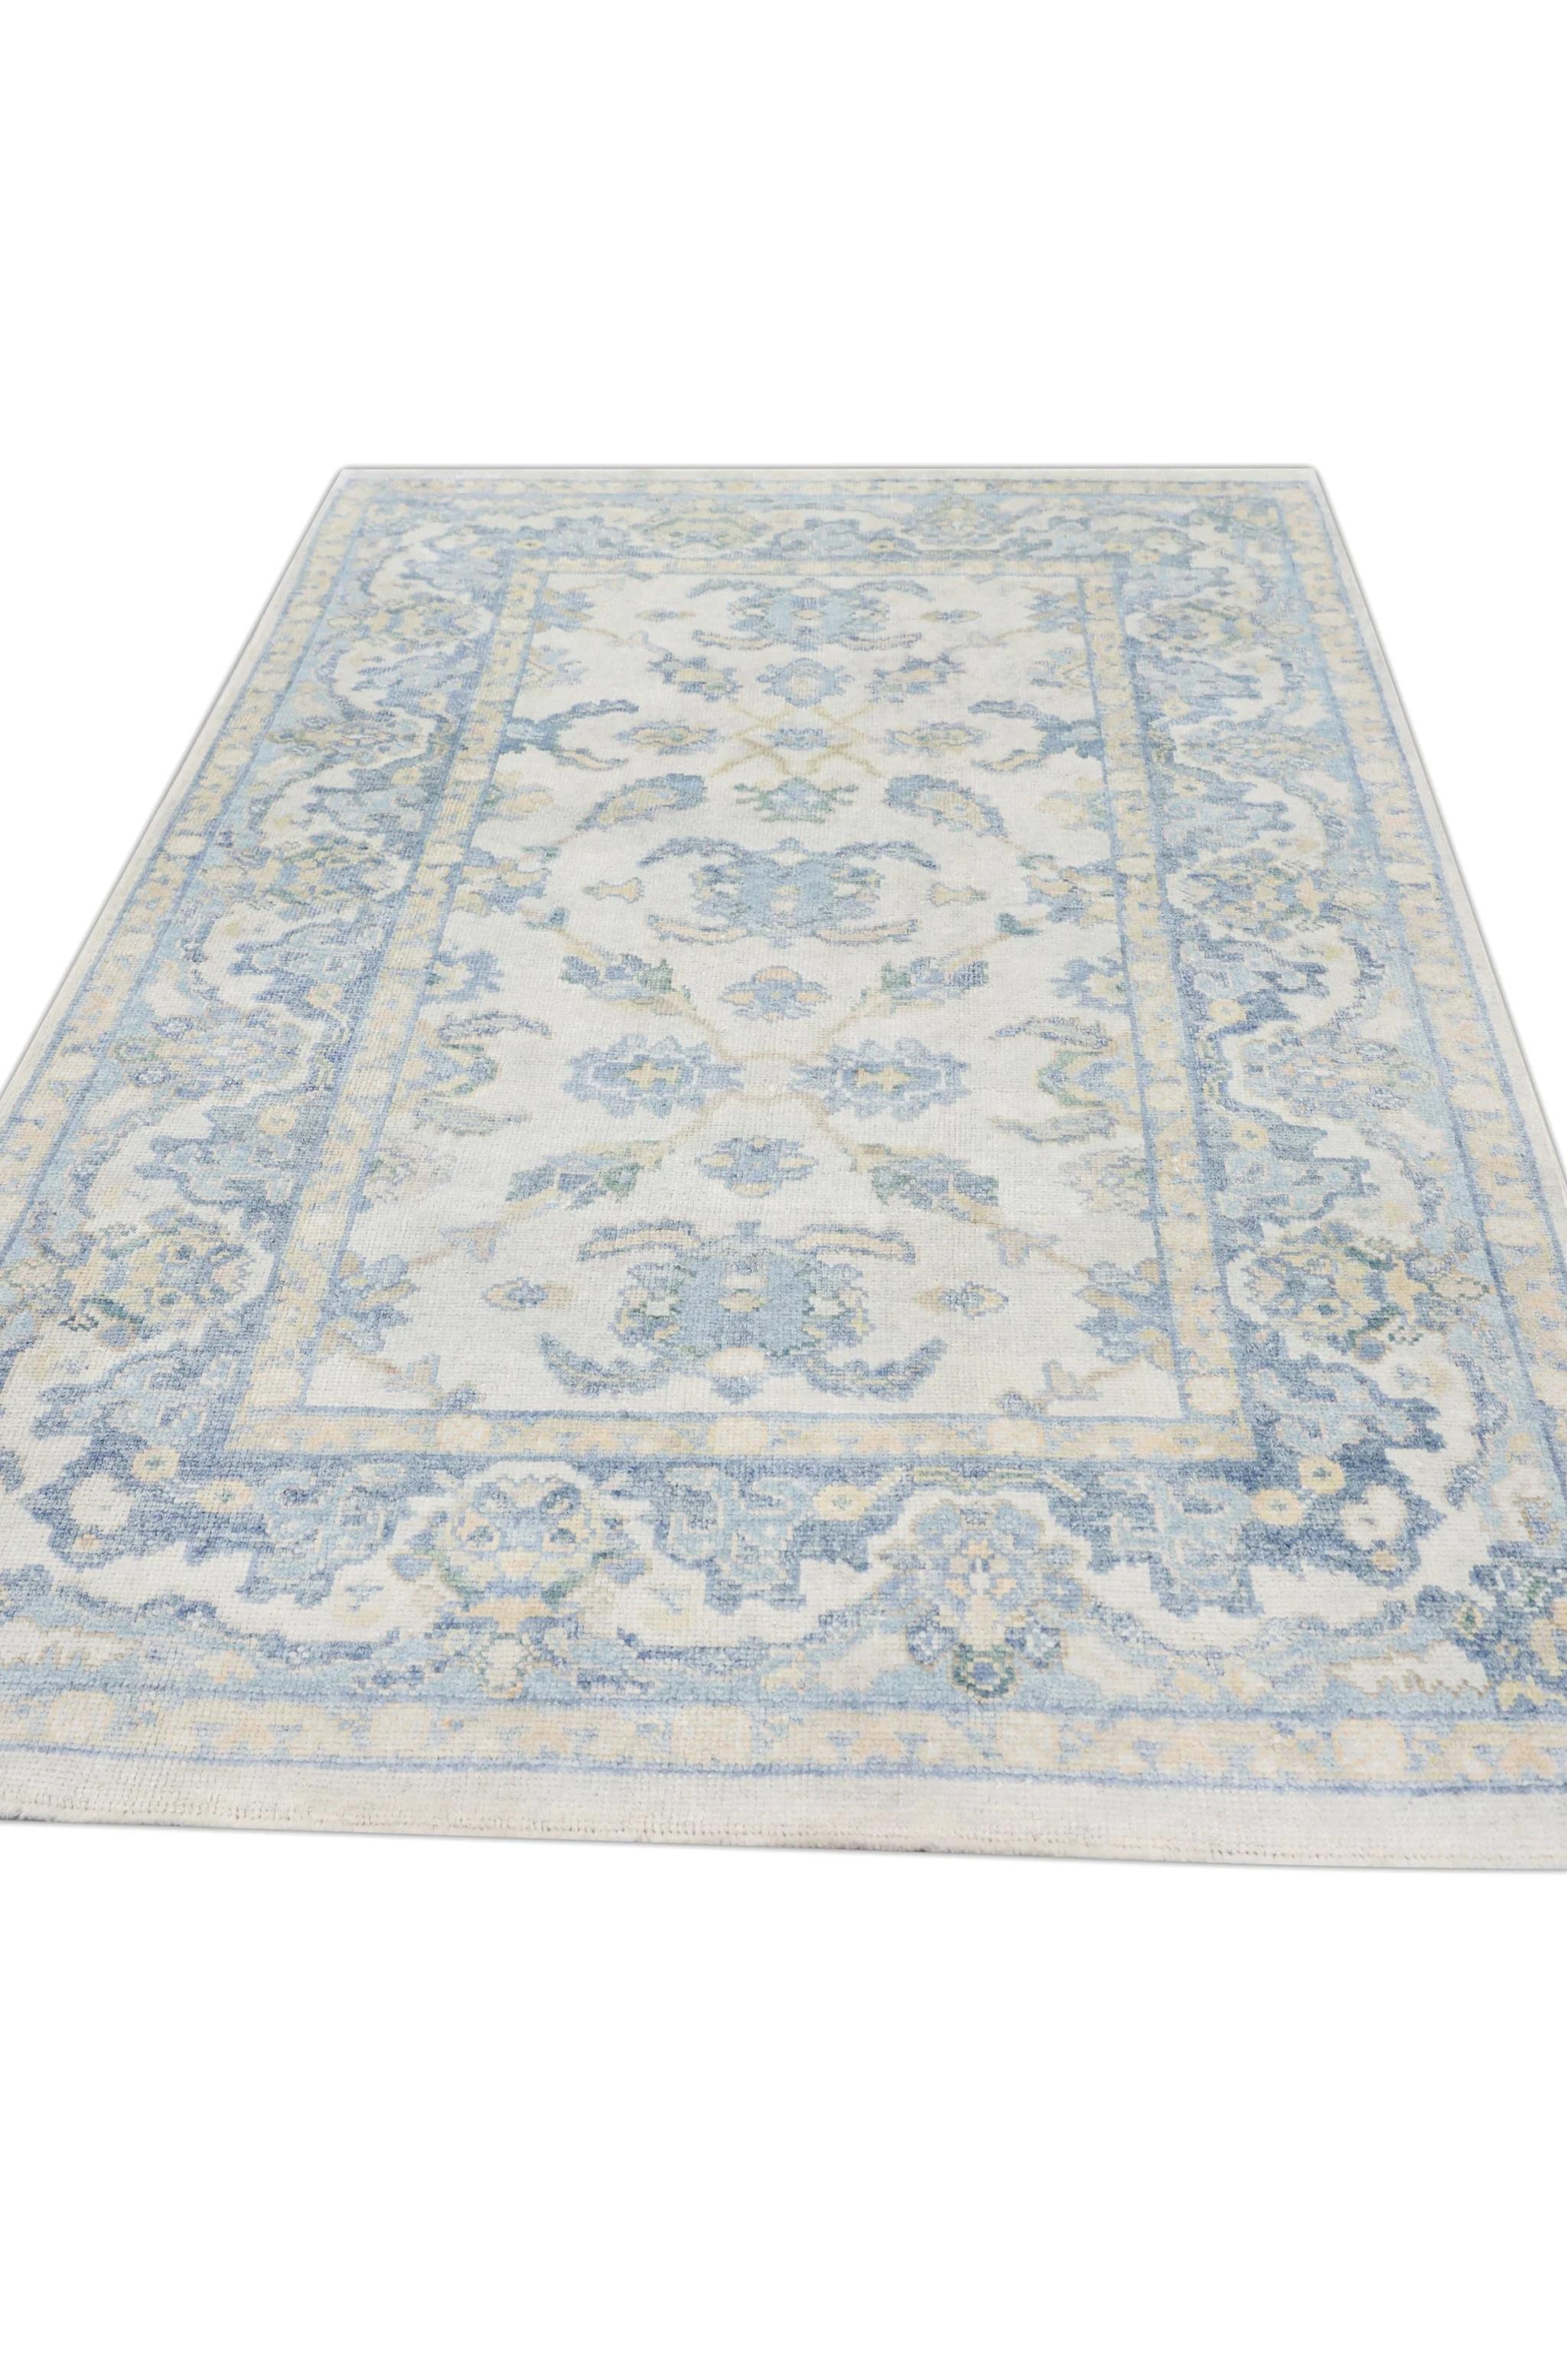 Soft Blue Handwoven Wool Turkish Oushak Rug with Floral Design 5' x 8'2